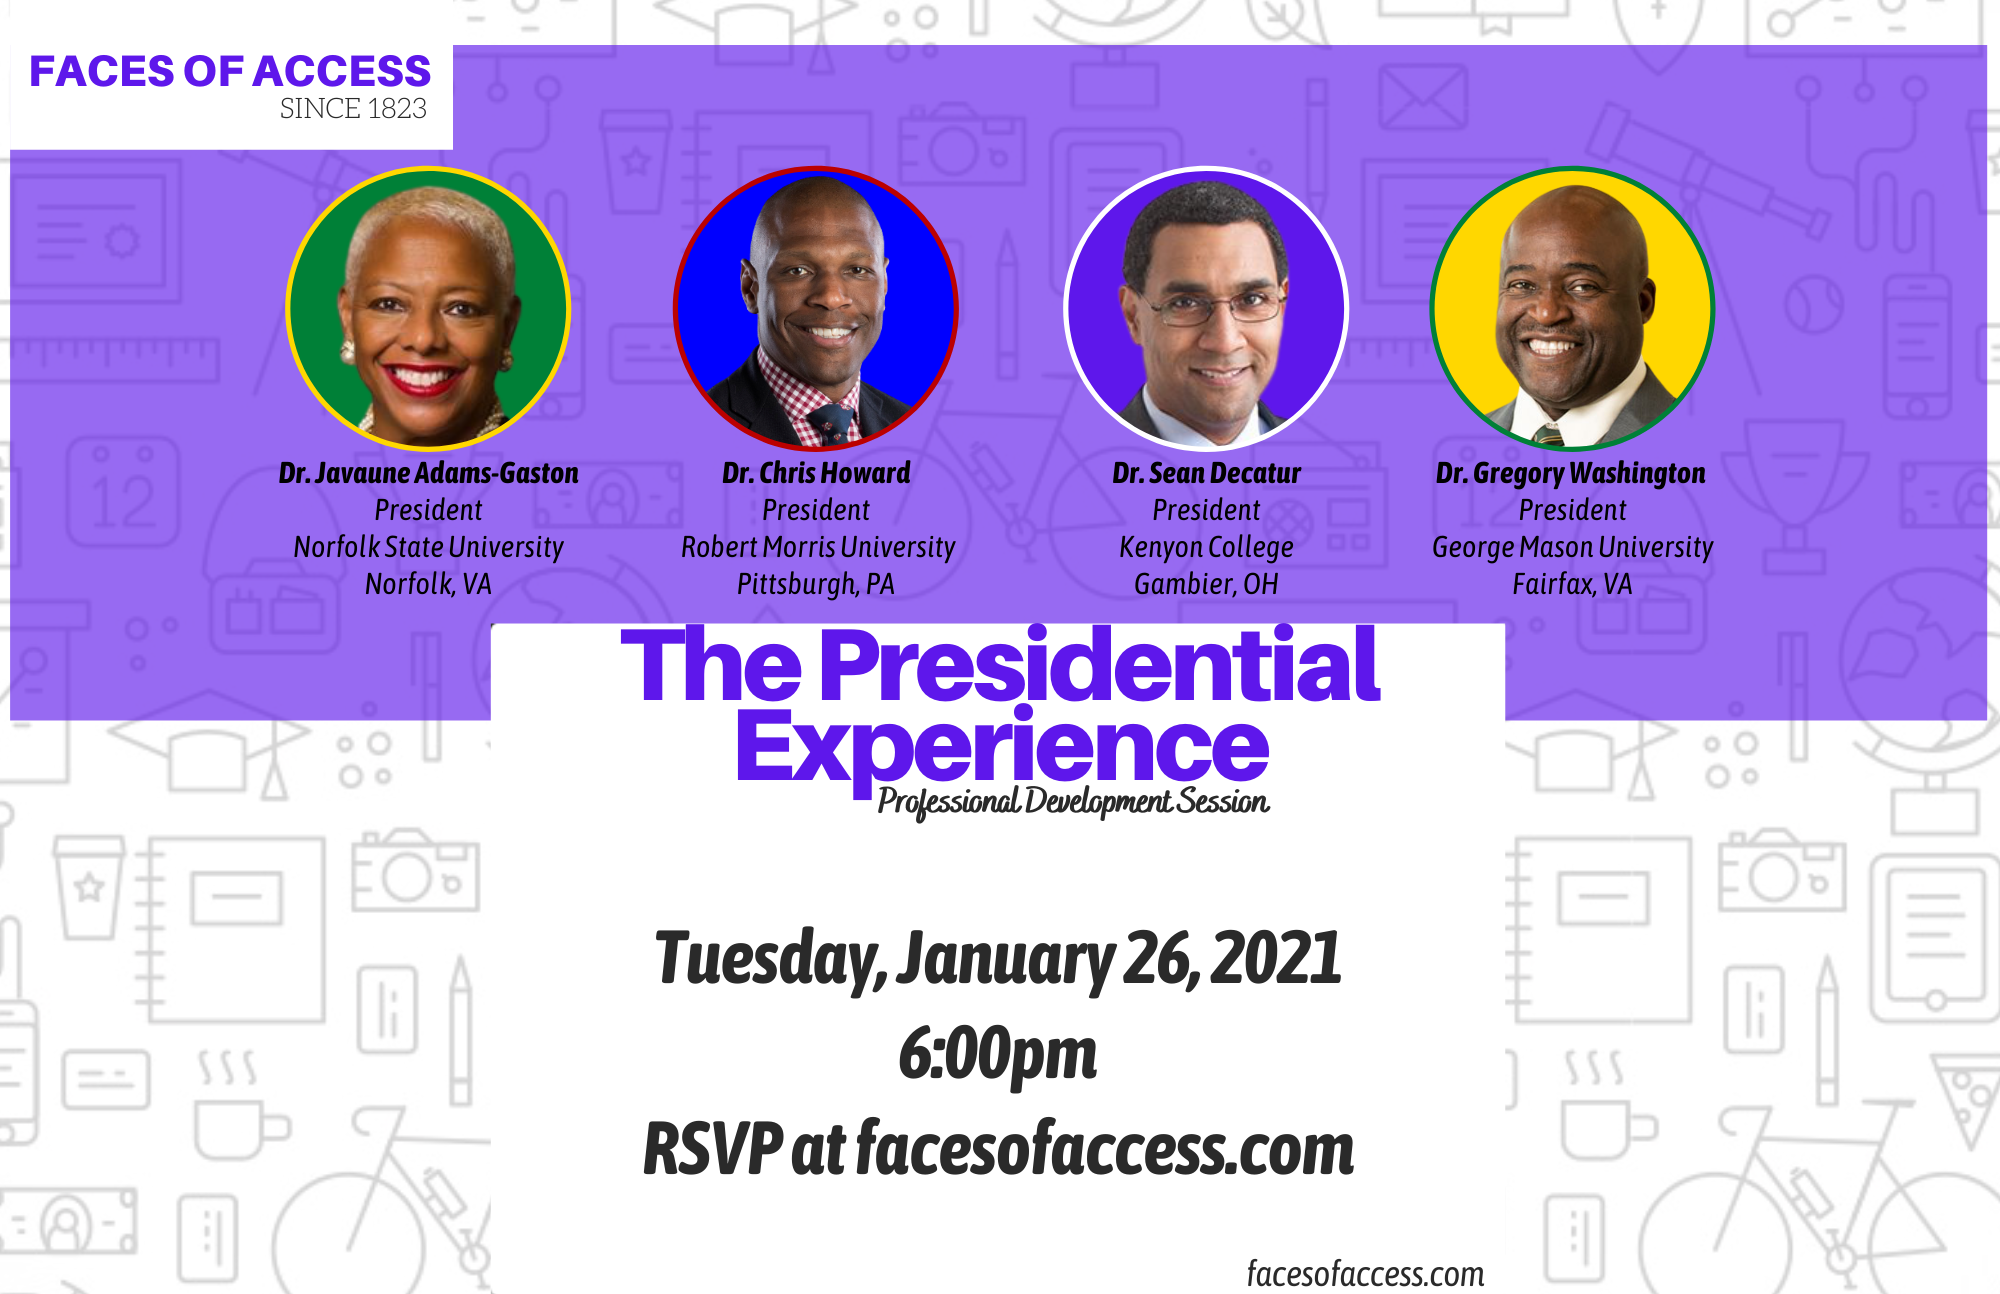  The Presidential Experience Professional Development Session featuring:   Dr. Javaune Adams-Gaston, Dr. Chris Howard,  Dr. Sean Decatur, and Dr. Gregory Washington   